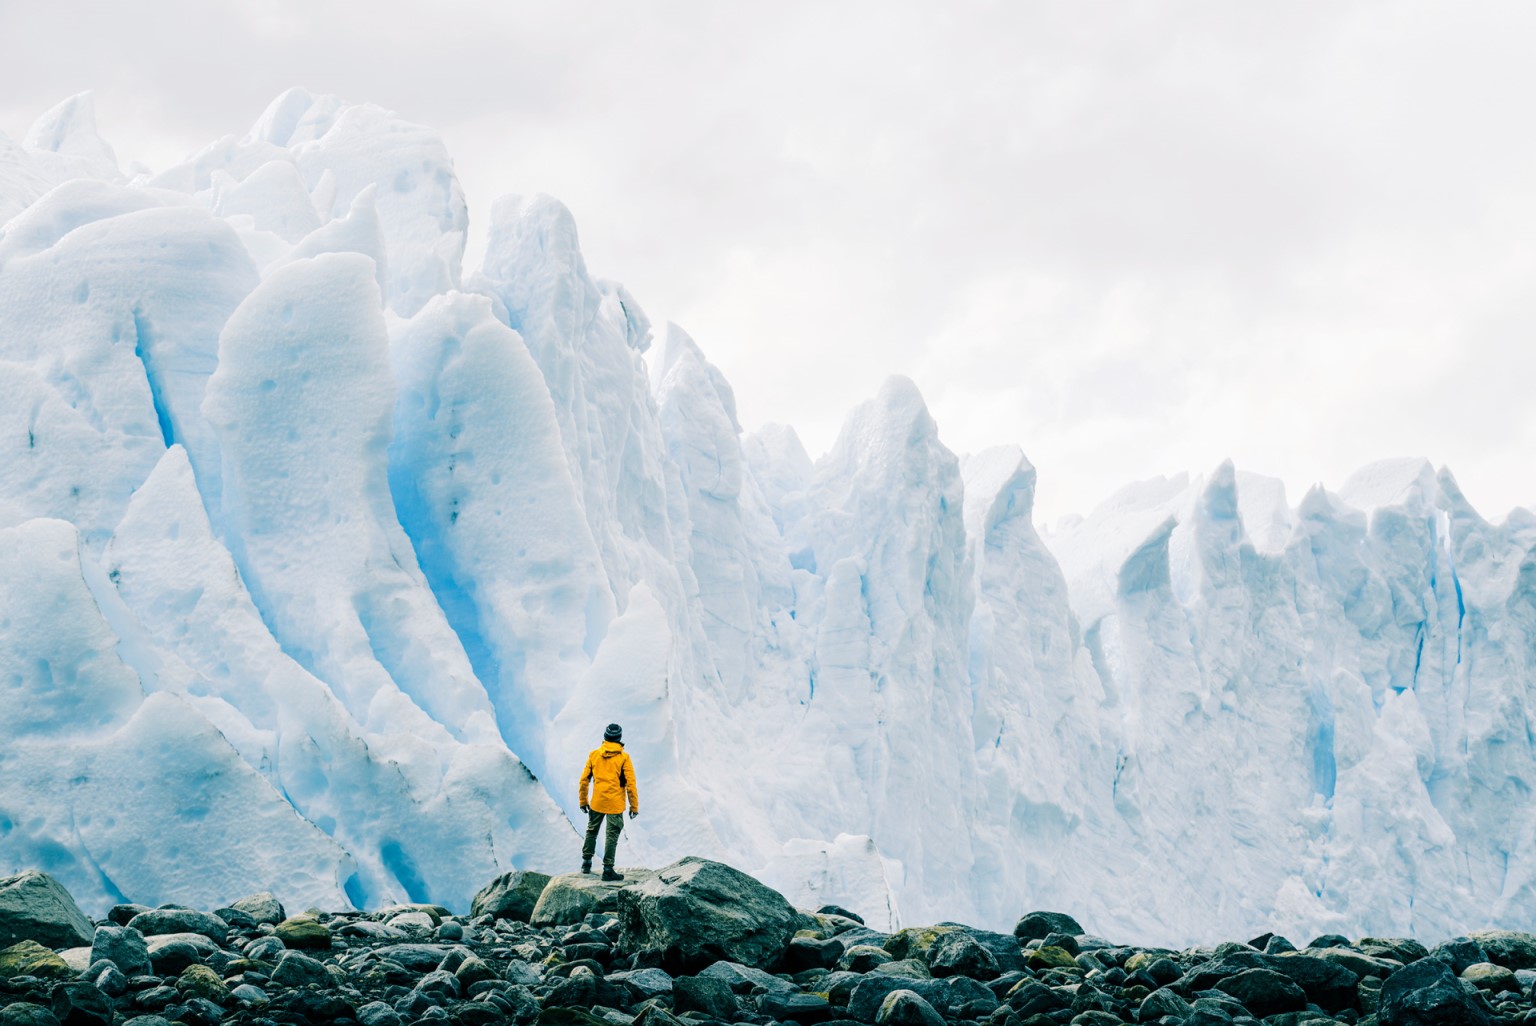 Person dressed in yellow in front of icebergs